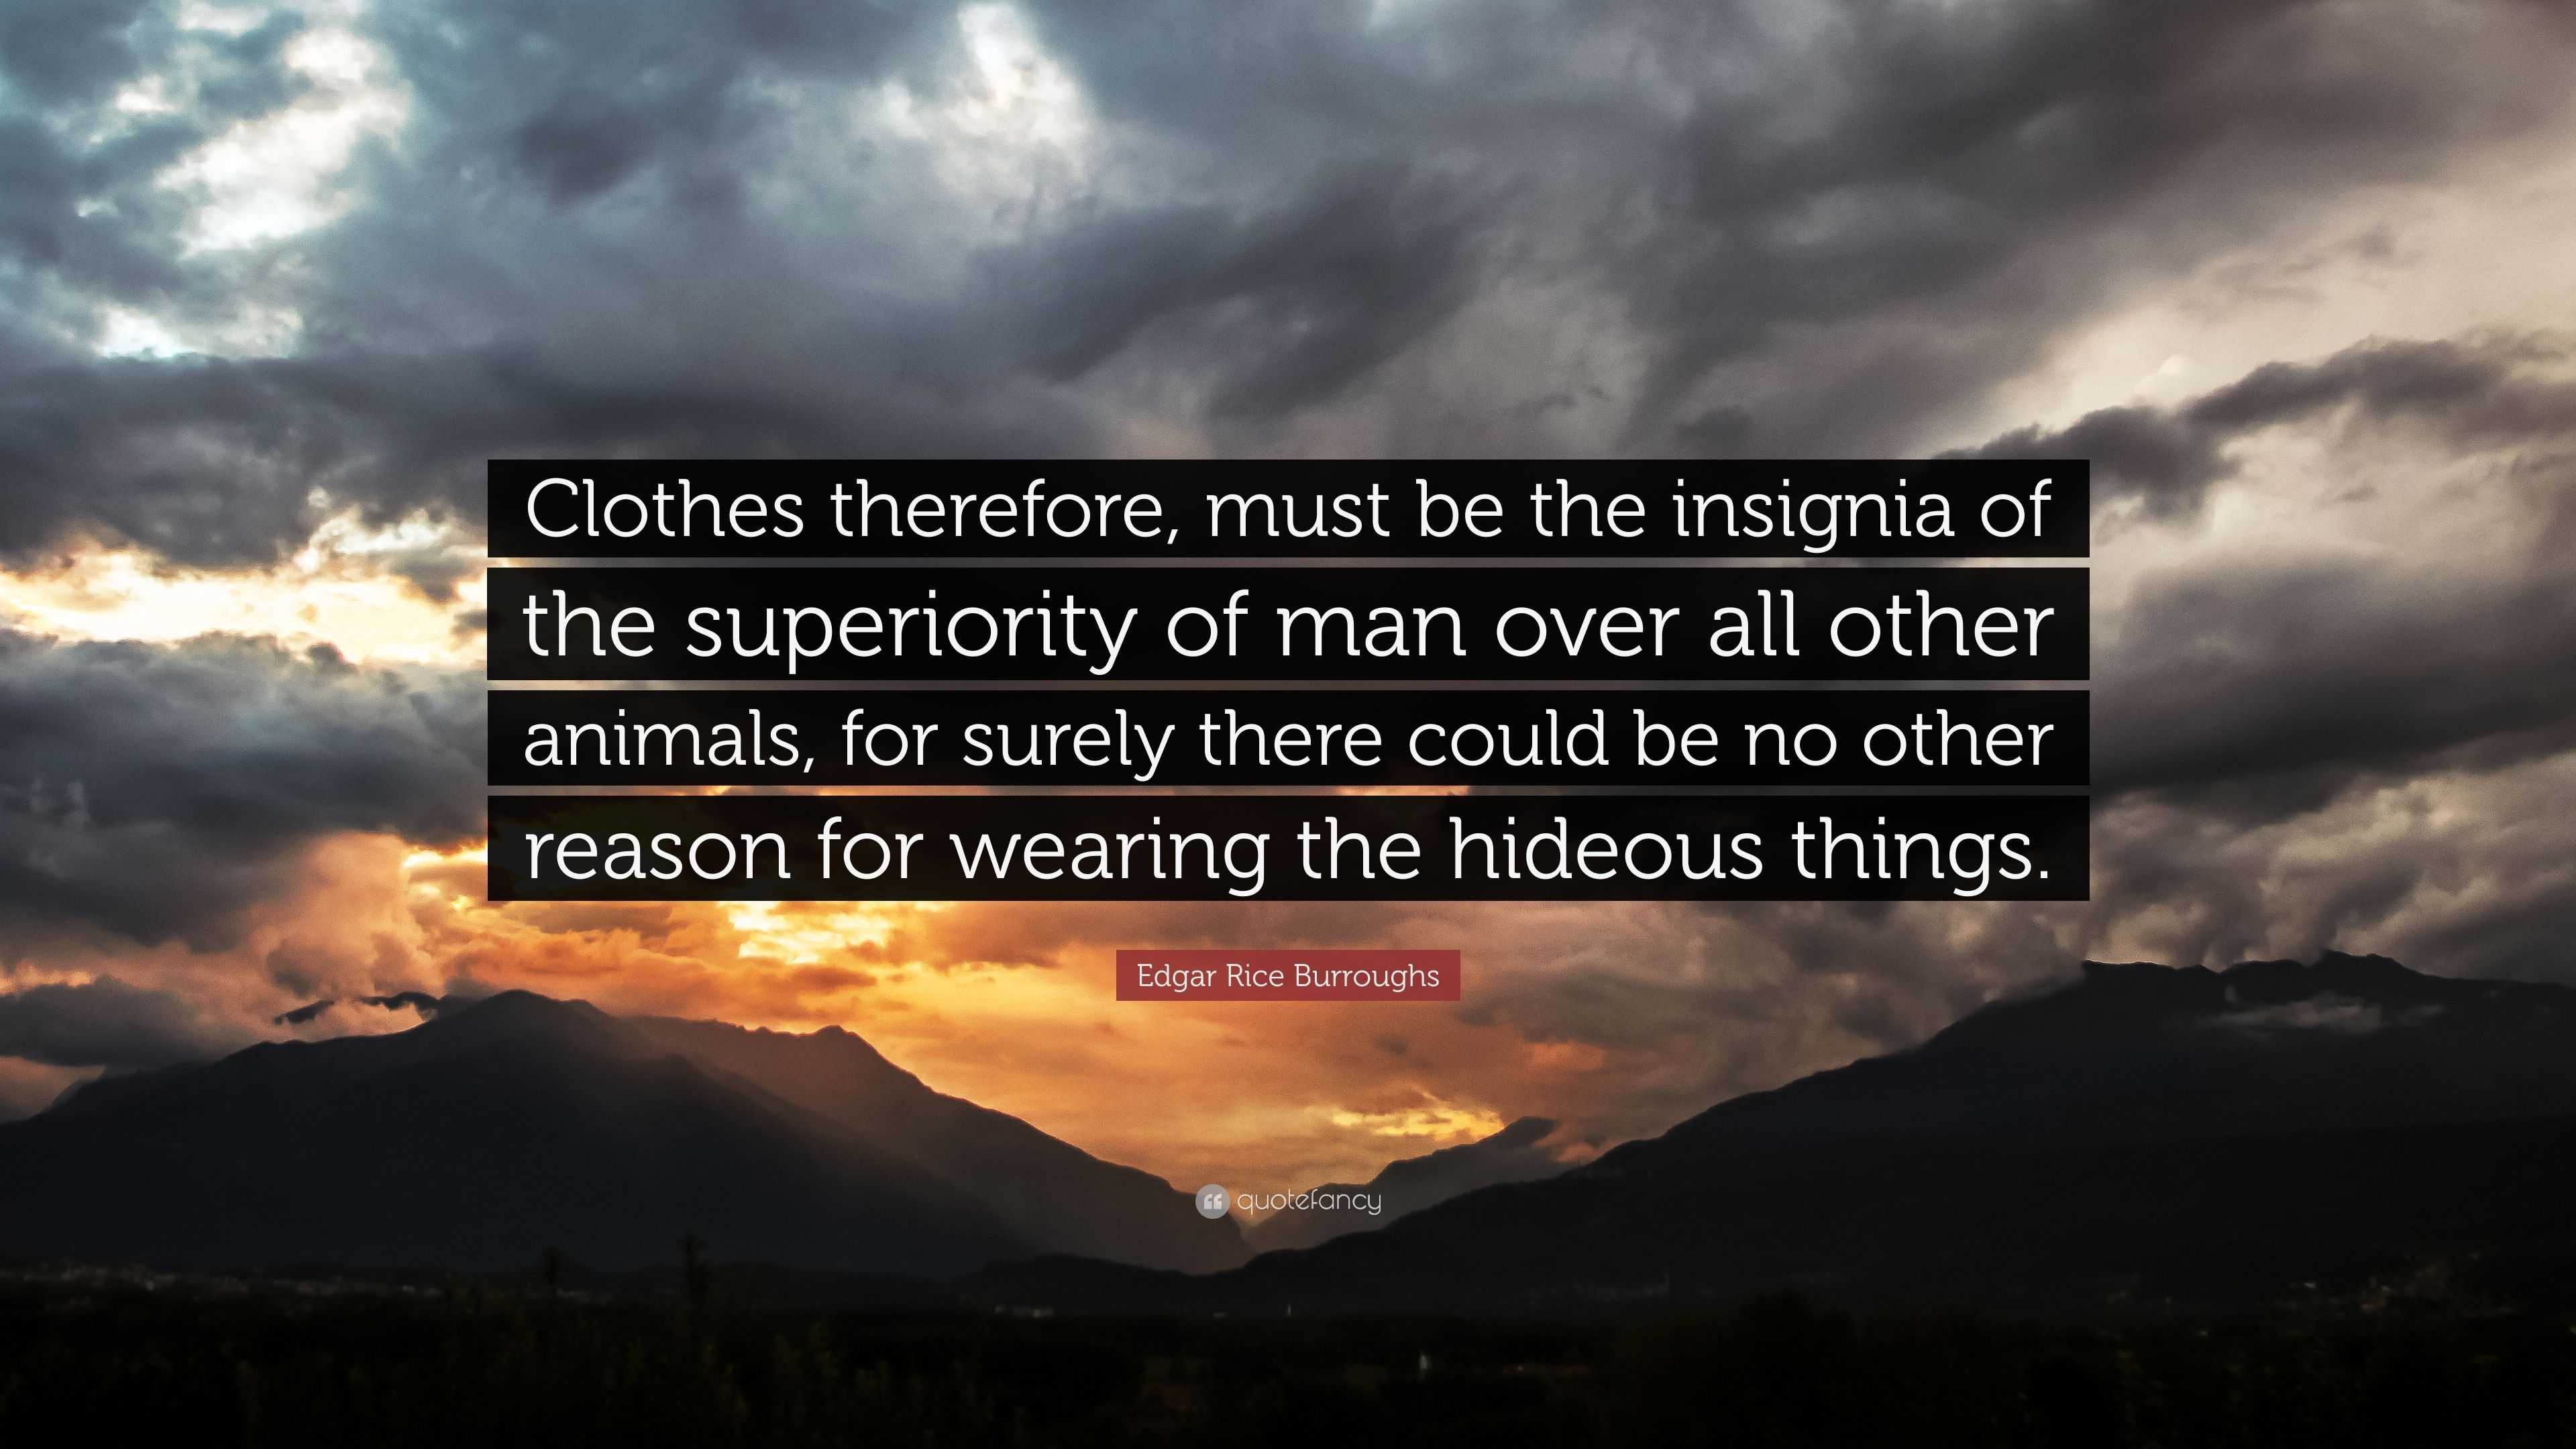 Edgar Rice Burroughs Quote: “Clothes therefore, must be the insignia of the  superiority of man over all other animals, for surely there could be no  o...”